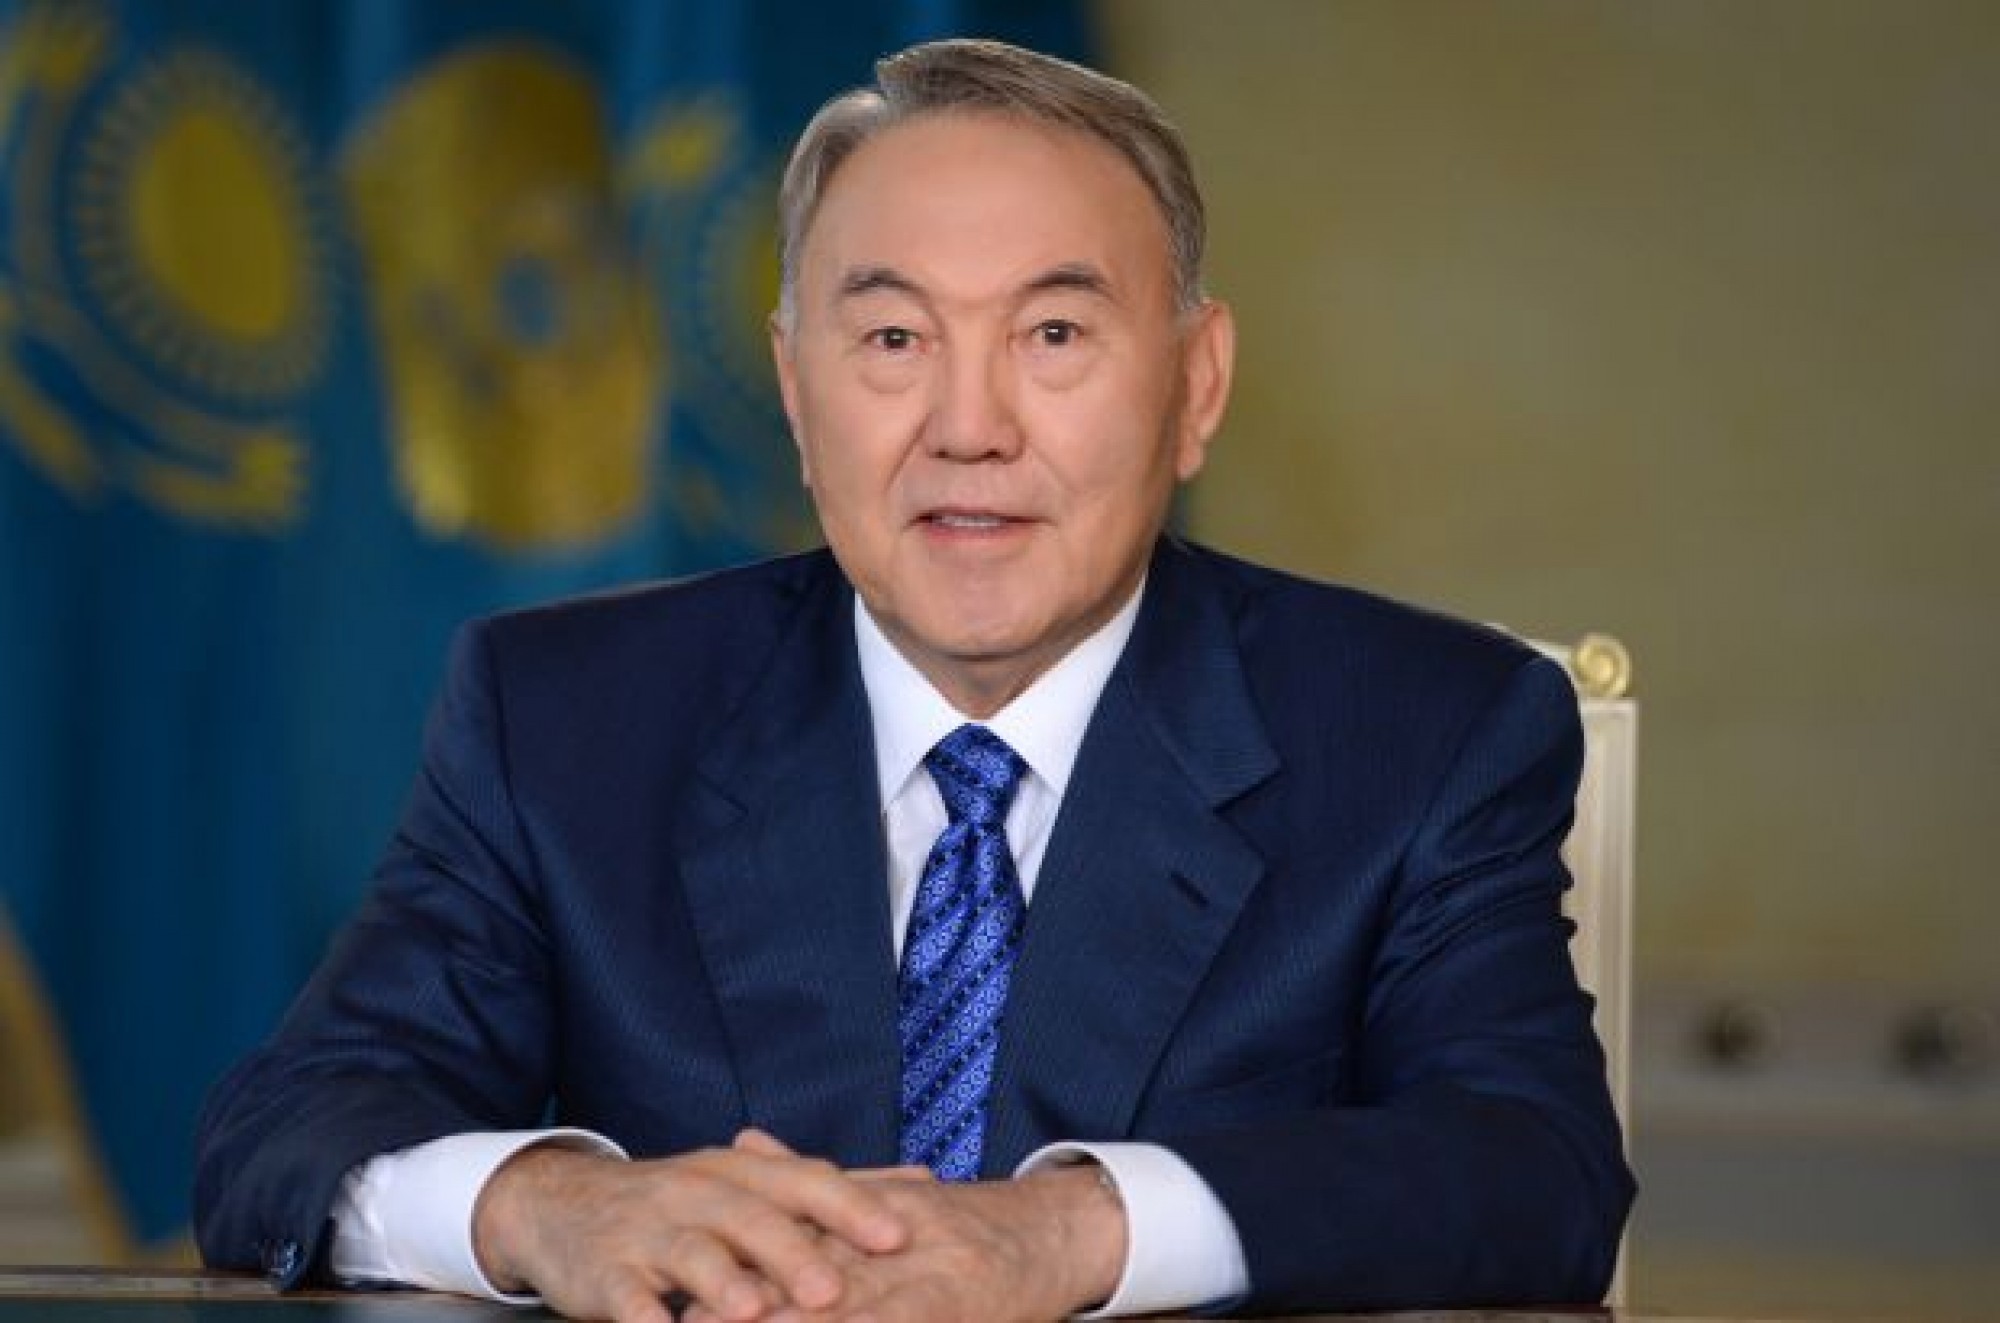 The Head of State congratulates Kazakhstanis on Constitution Day